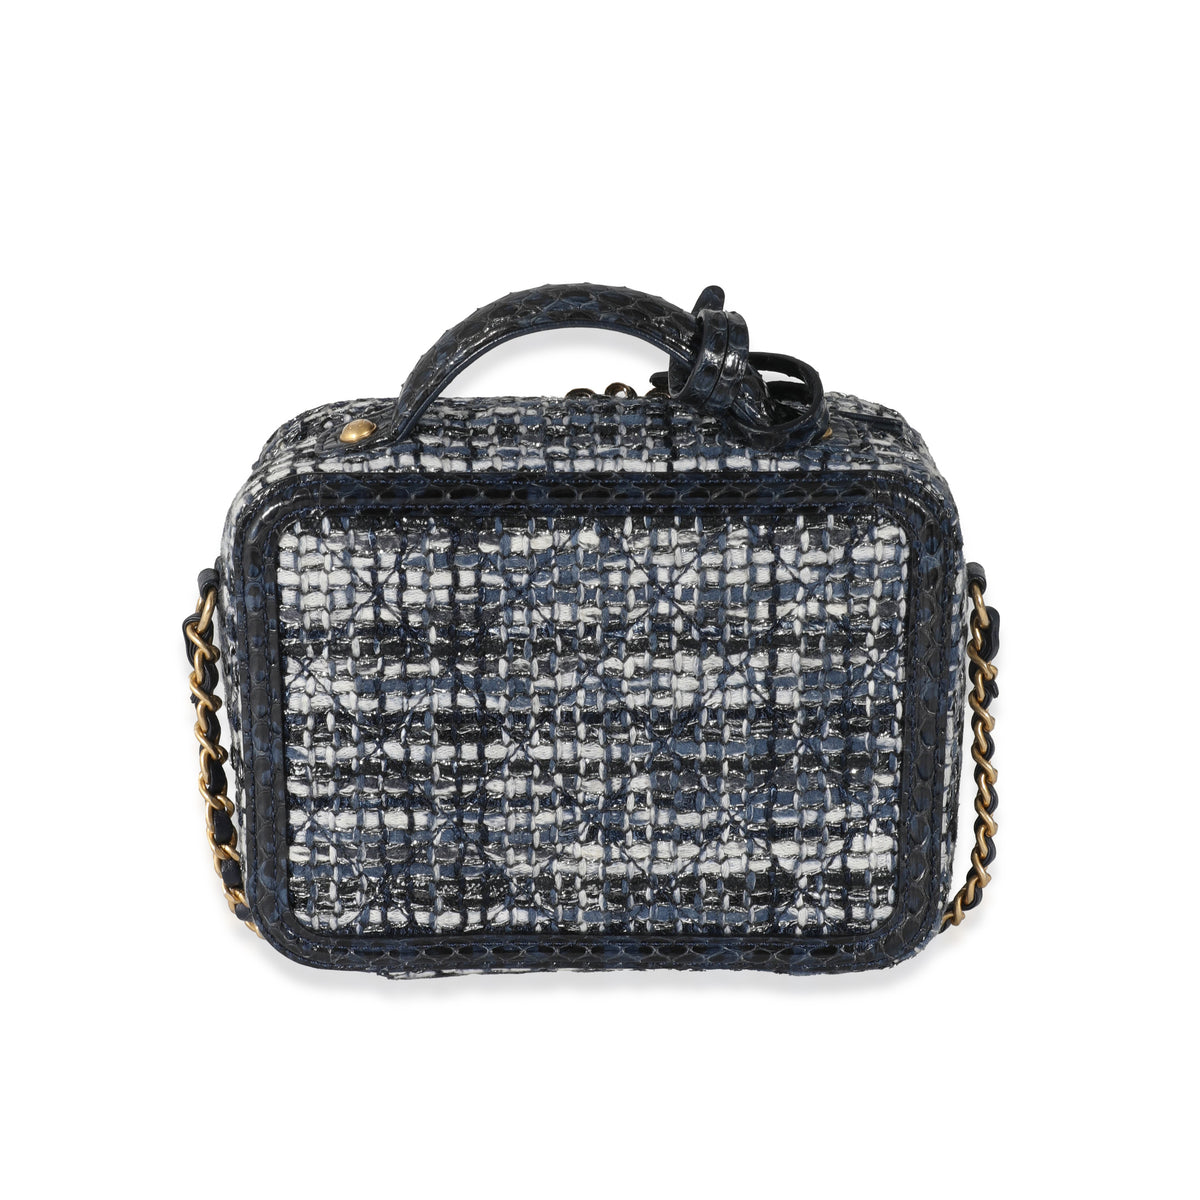 Chanel Silver Metallic Quilted Caviar Mini Vanity Bag With Chain, myGemma